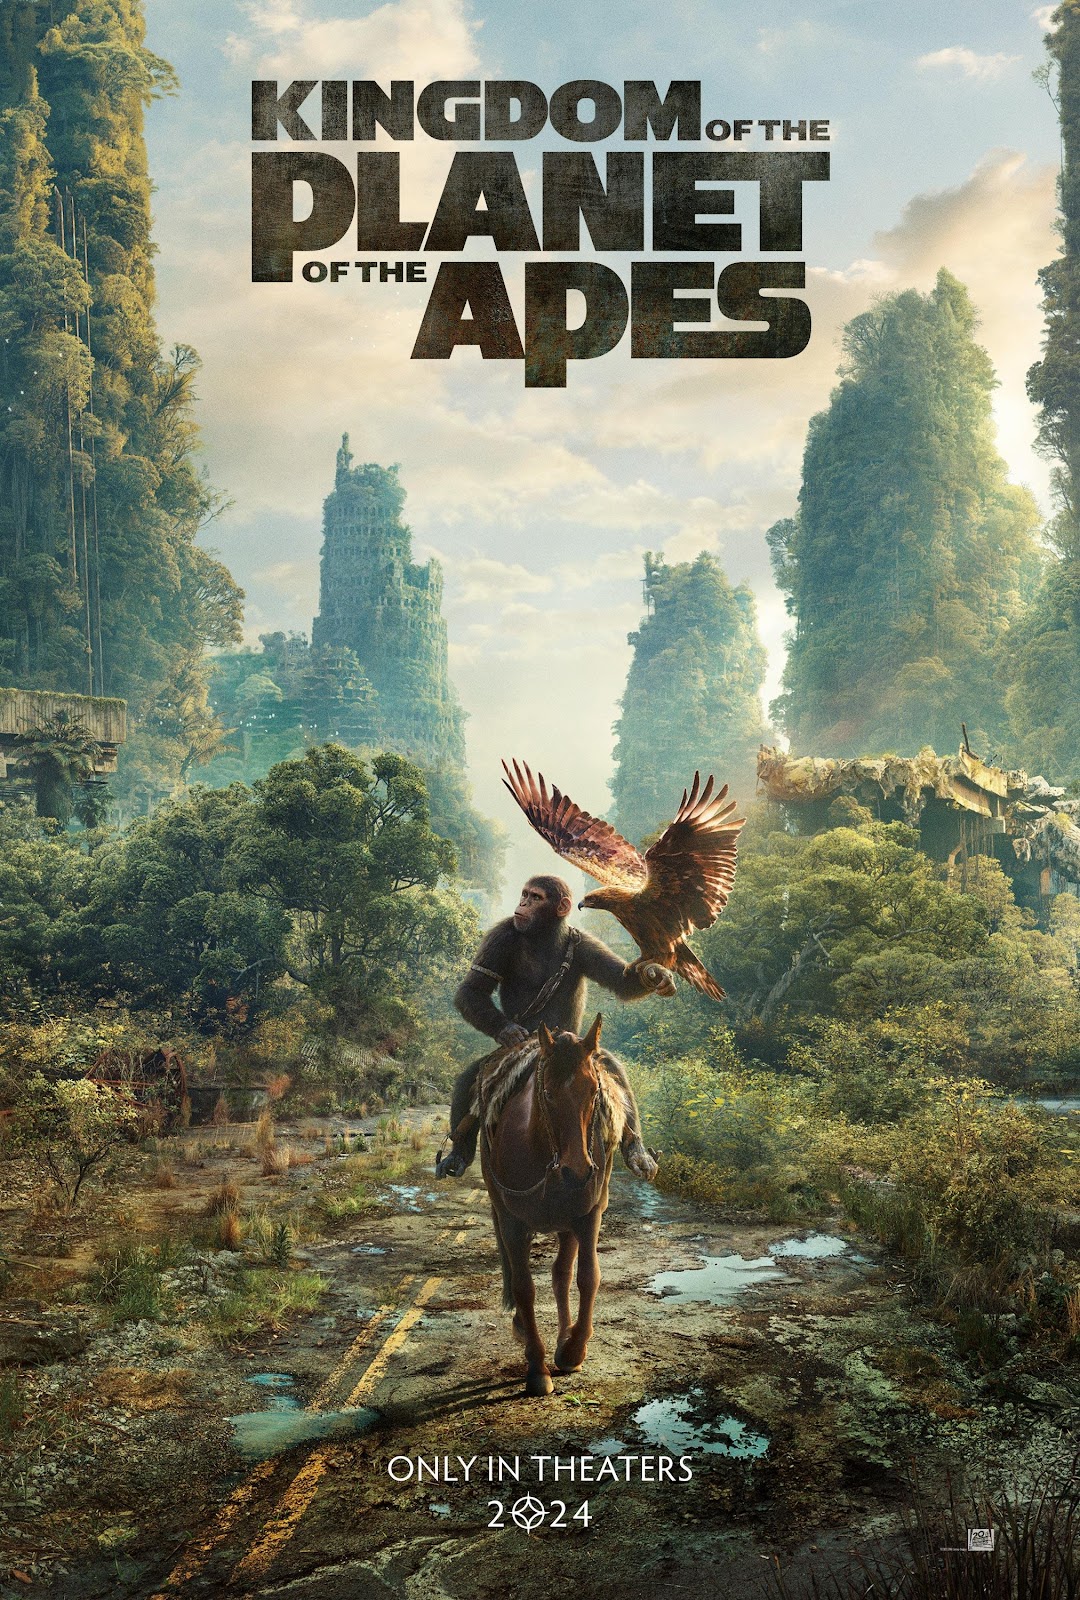 'Kingdom of the Planet of the Apes'.